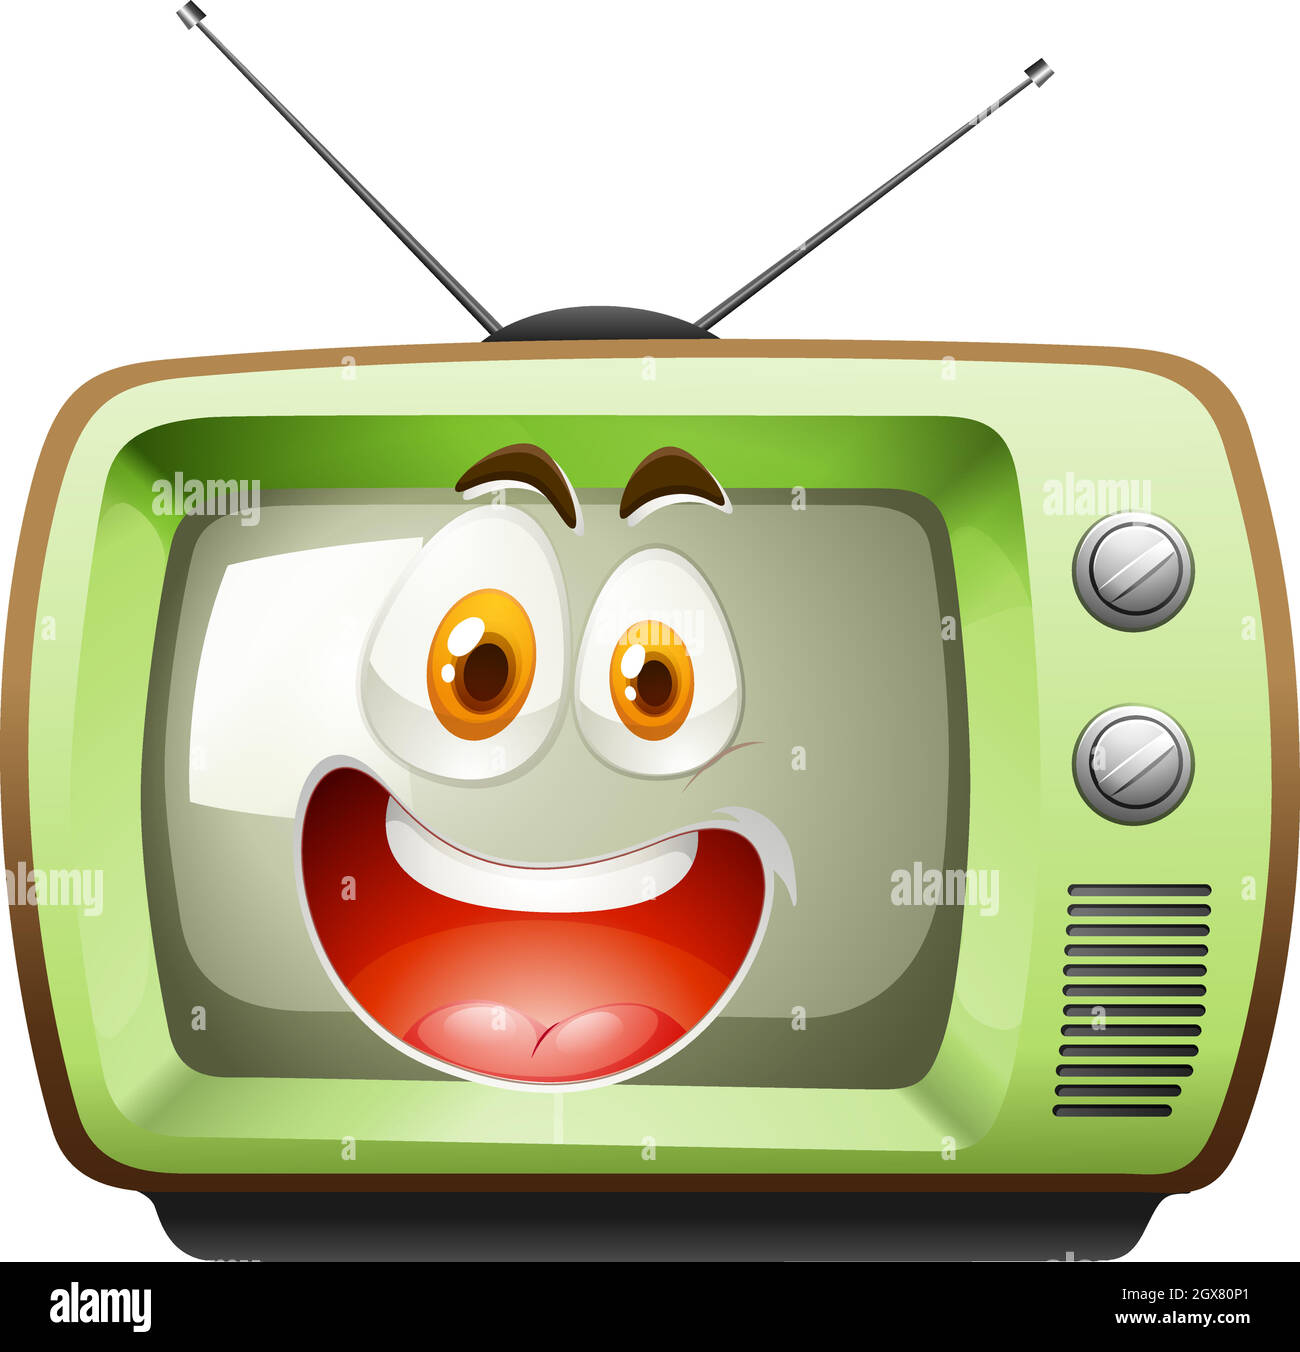 Retro television with face Stock Vector